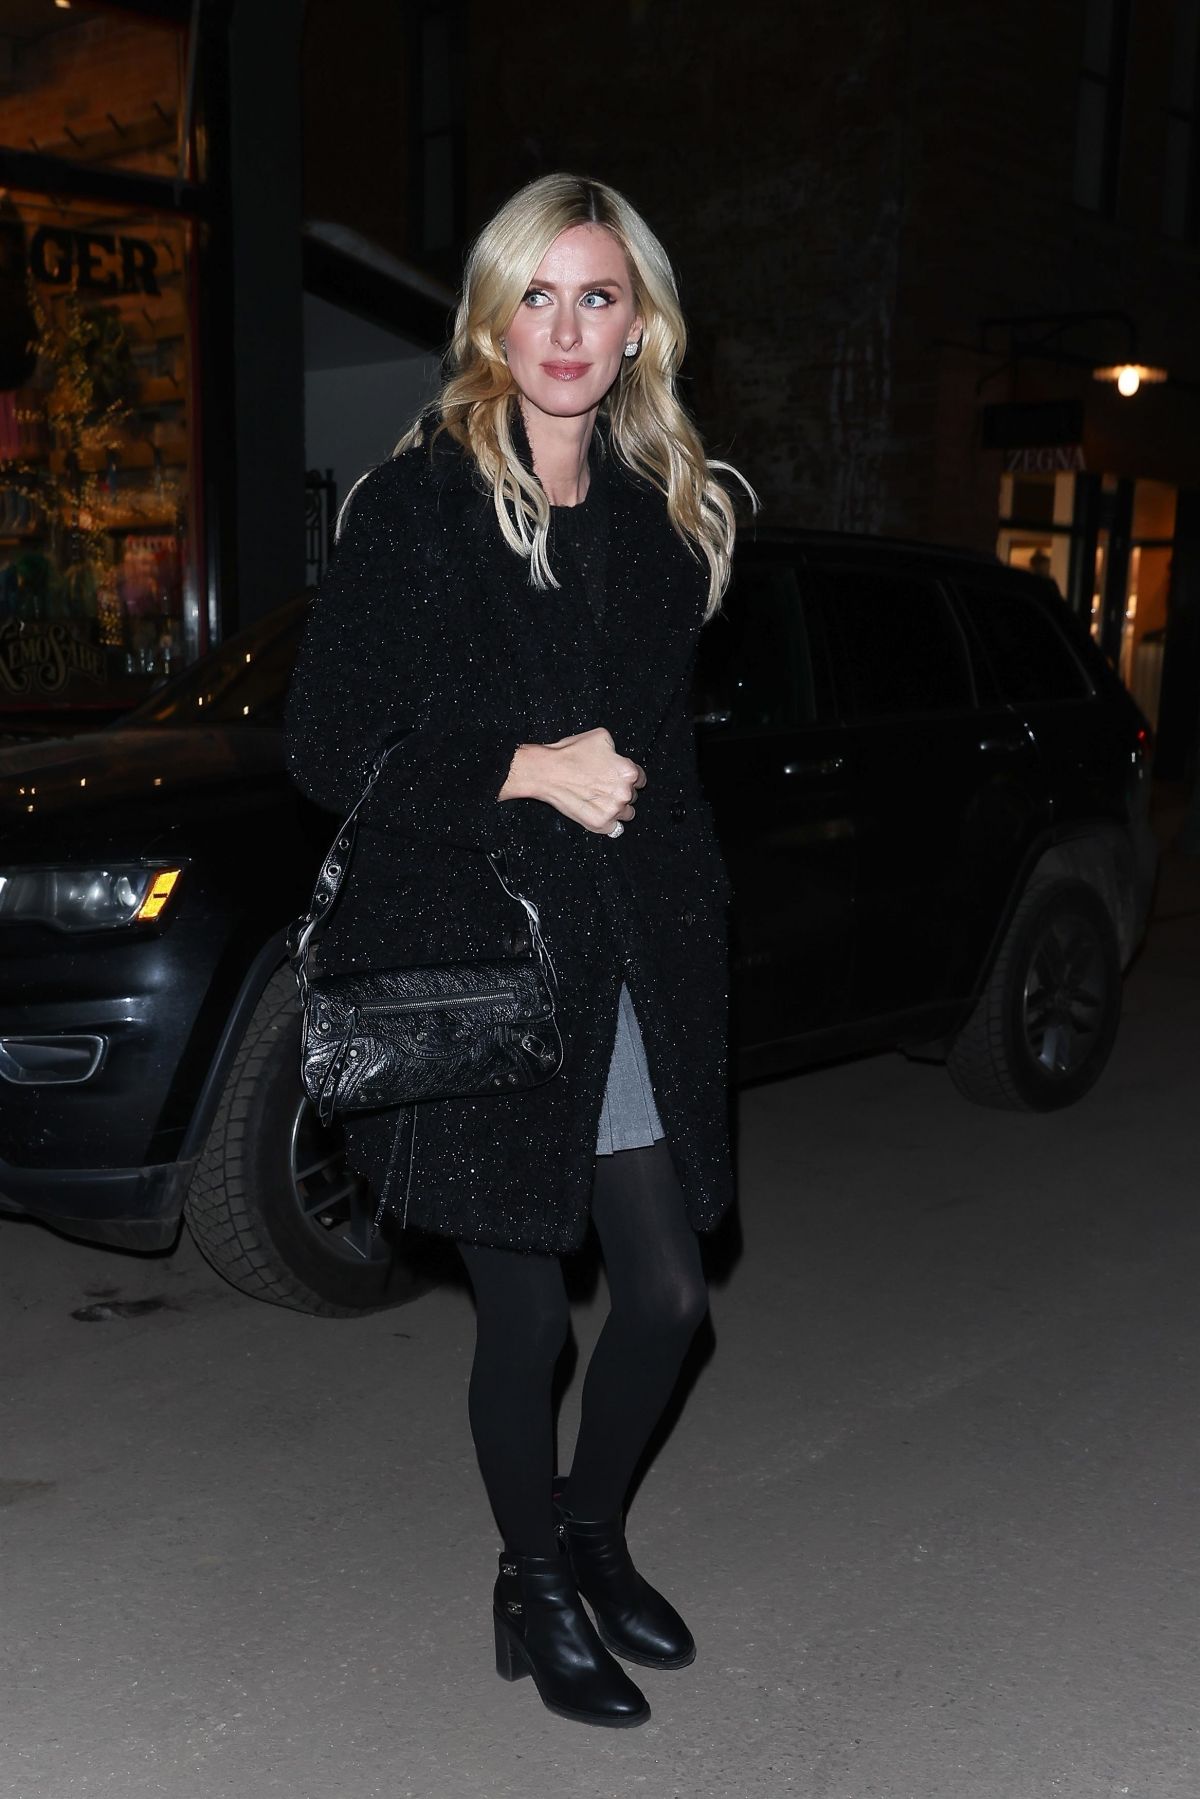 Nicky Hilton in Chic Black Outfit Leaving Kemo Sabe Aspen 1